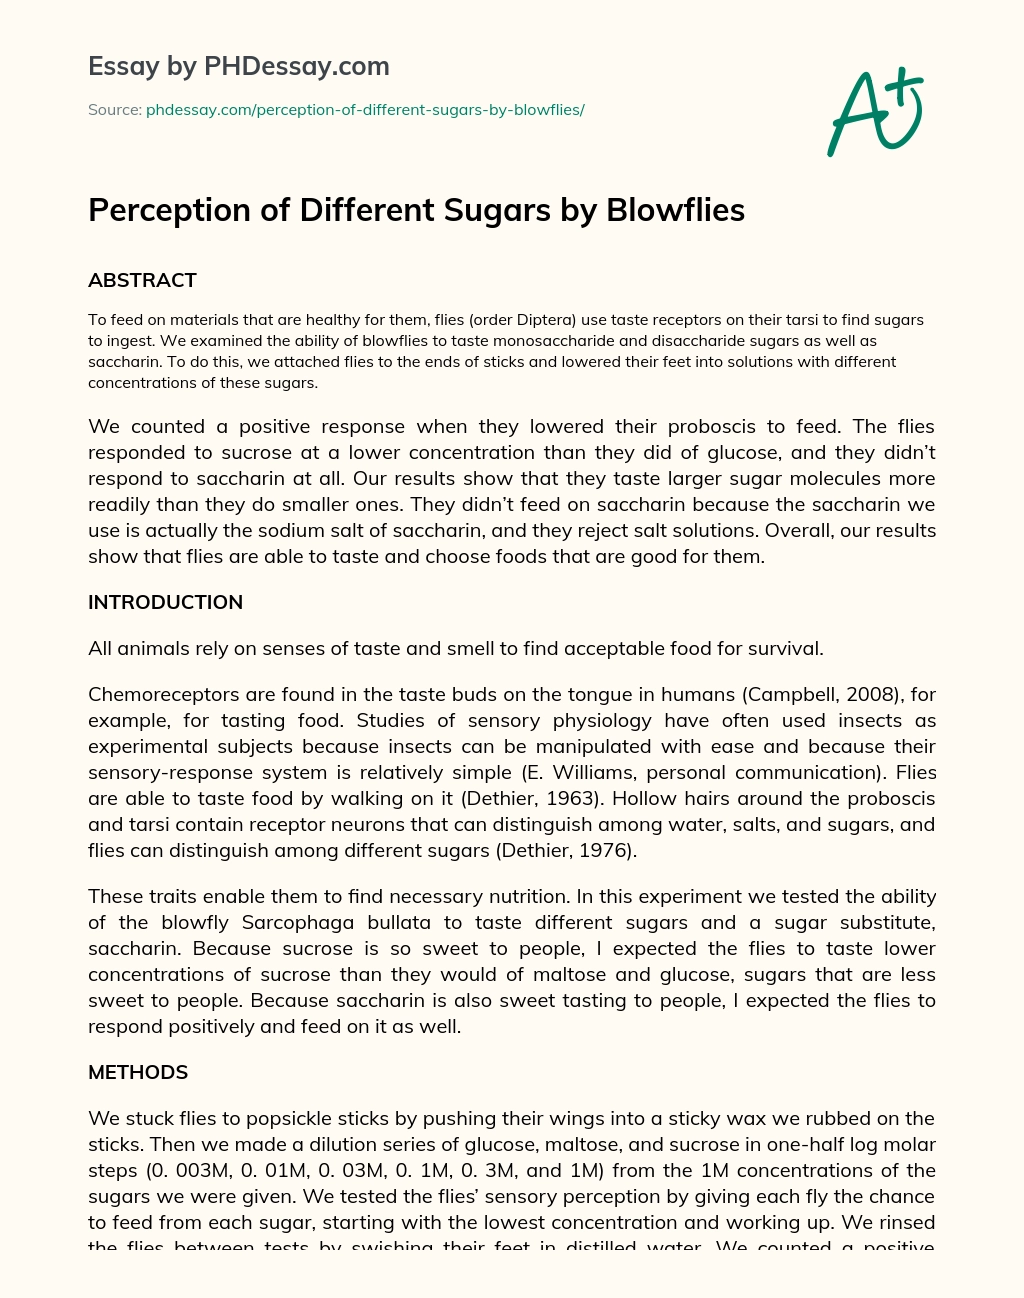 Perception of Different Sugars by Blowflies essay